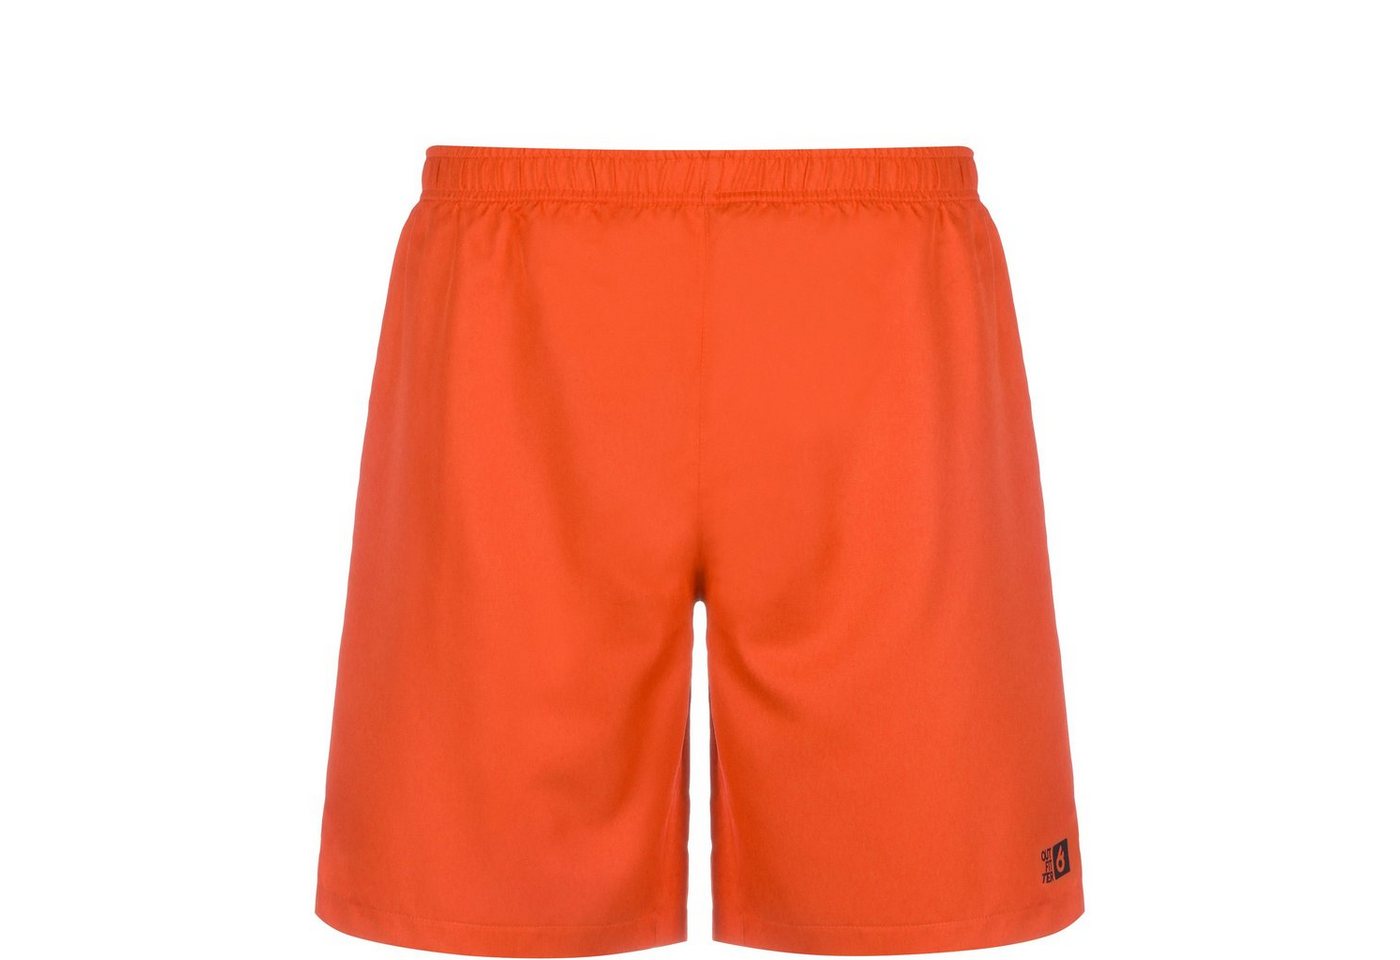 Outfitter Trainingsshorts OCEAN FABRICS TAHI Match Shorts Kinder von Outfitter